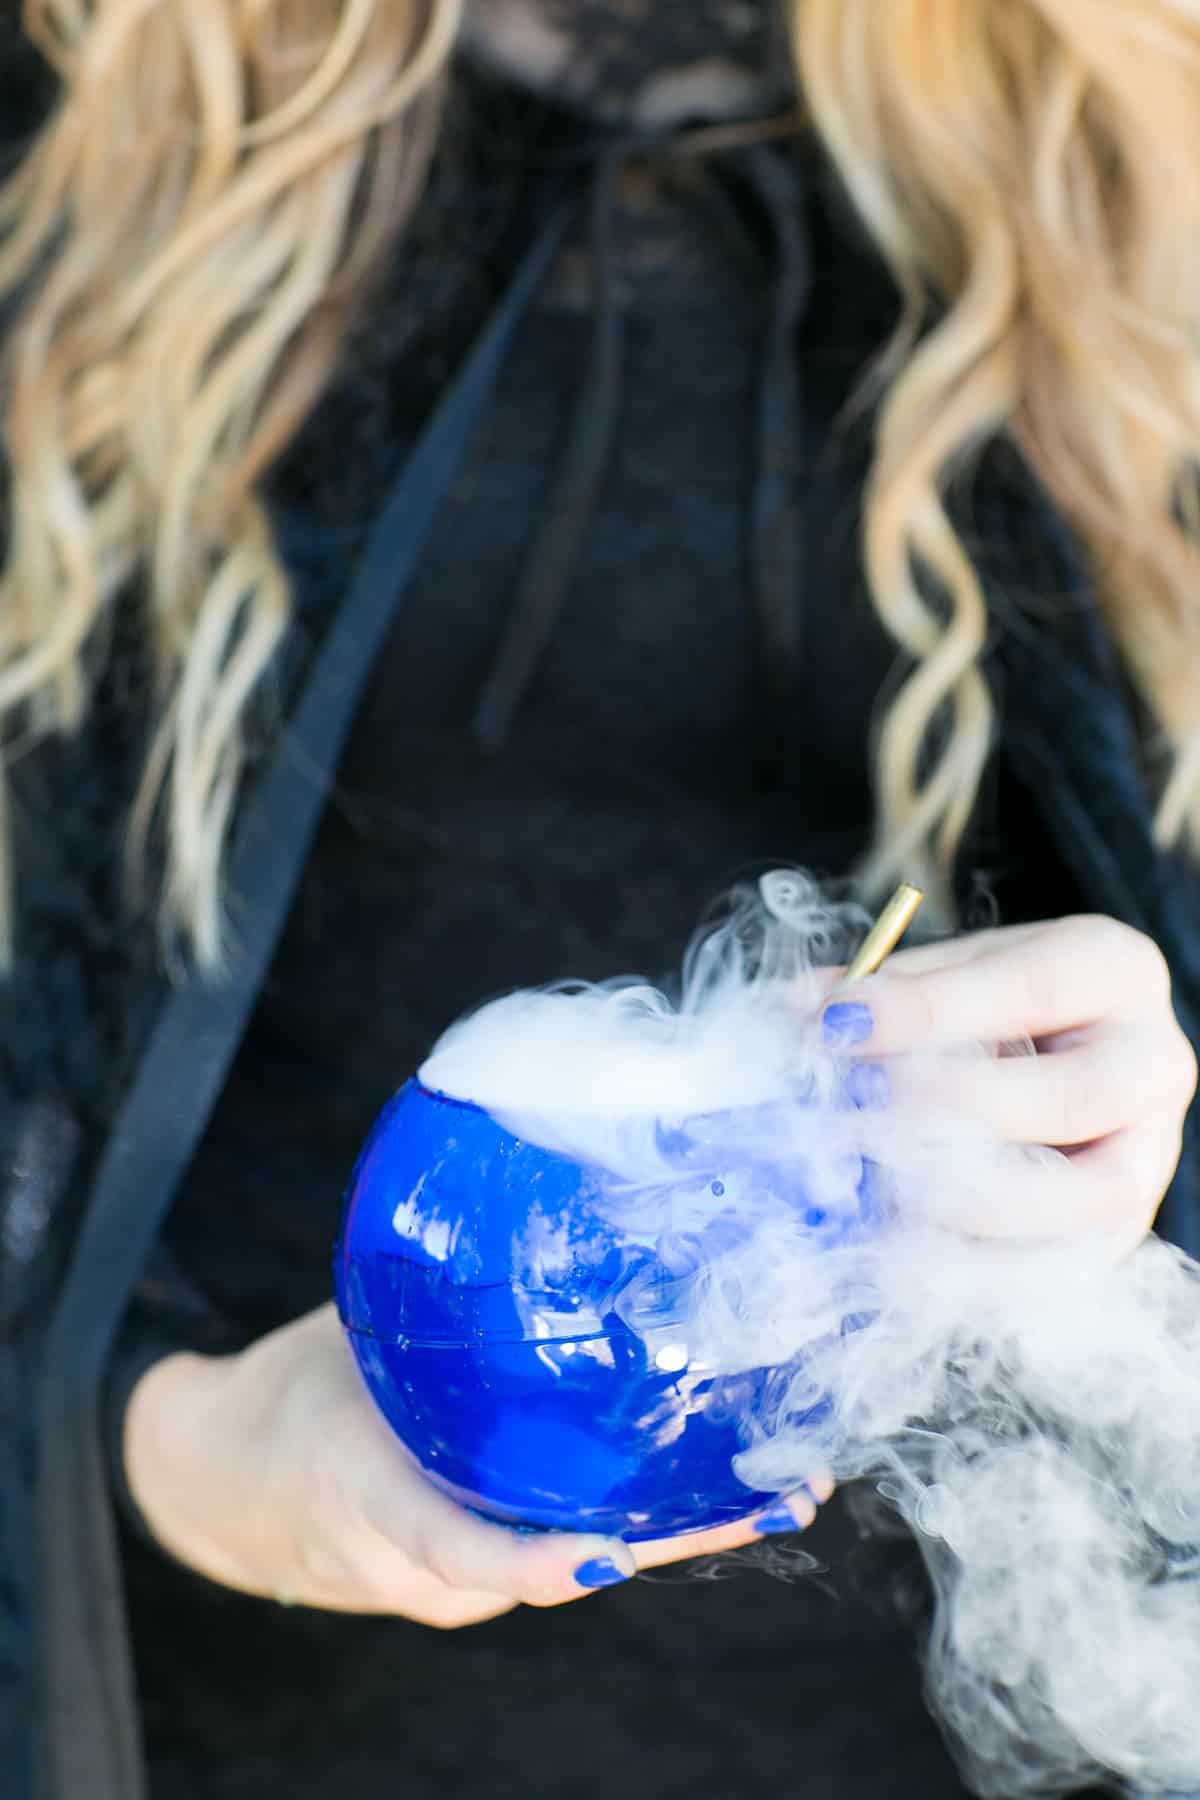 Girl holding an apple cider drink in a blue round cup